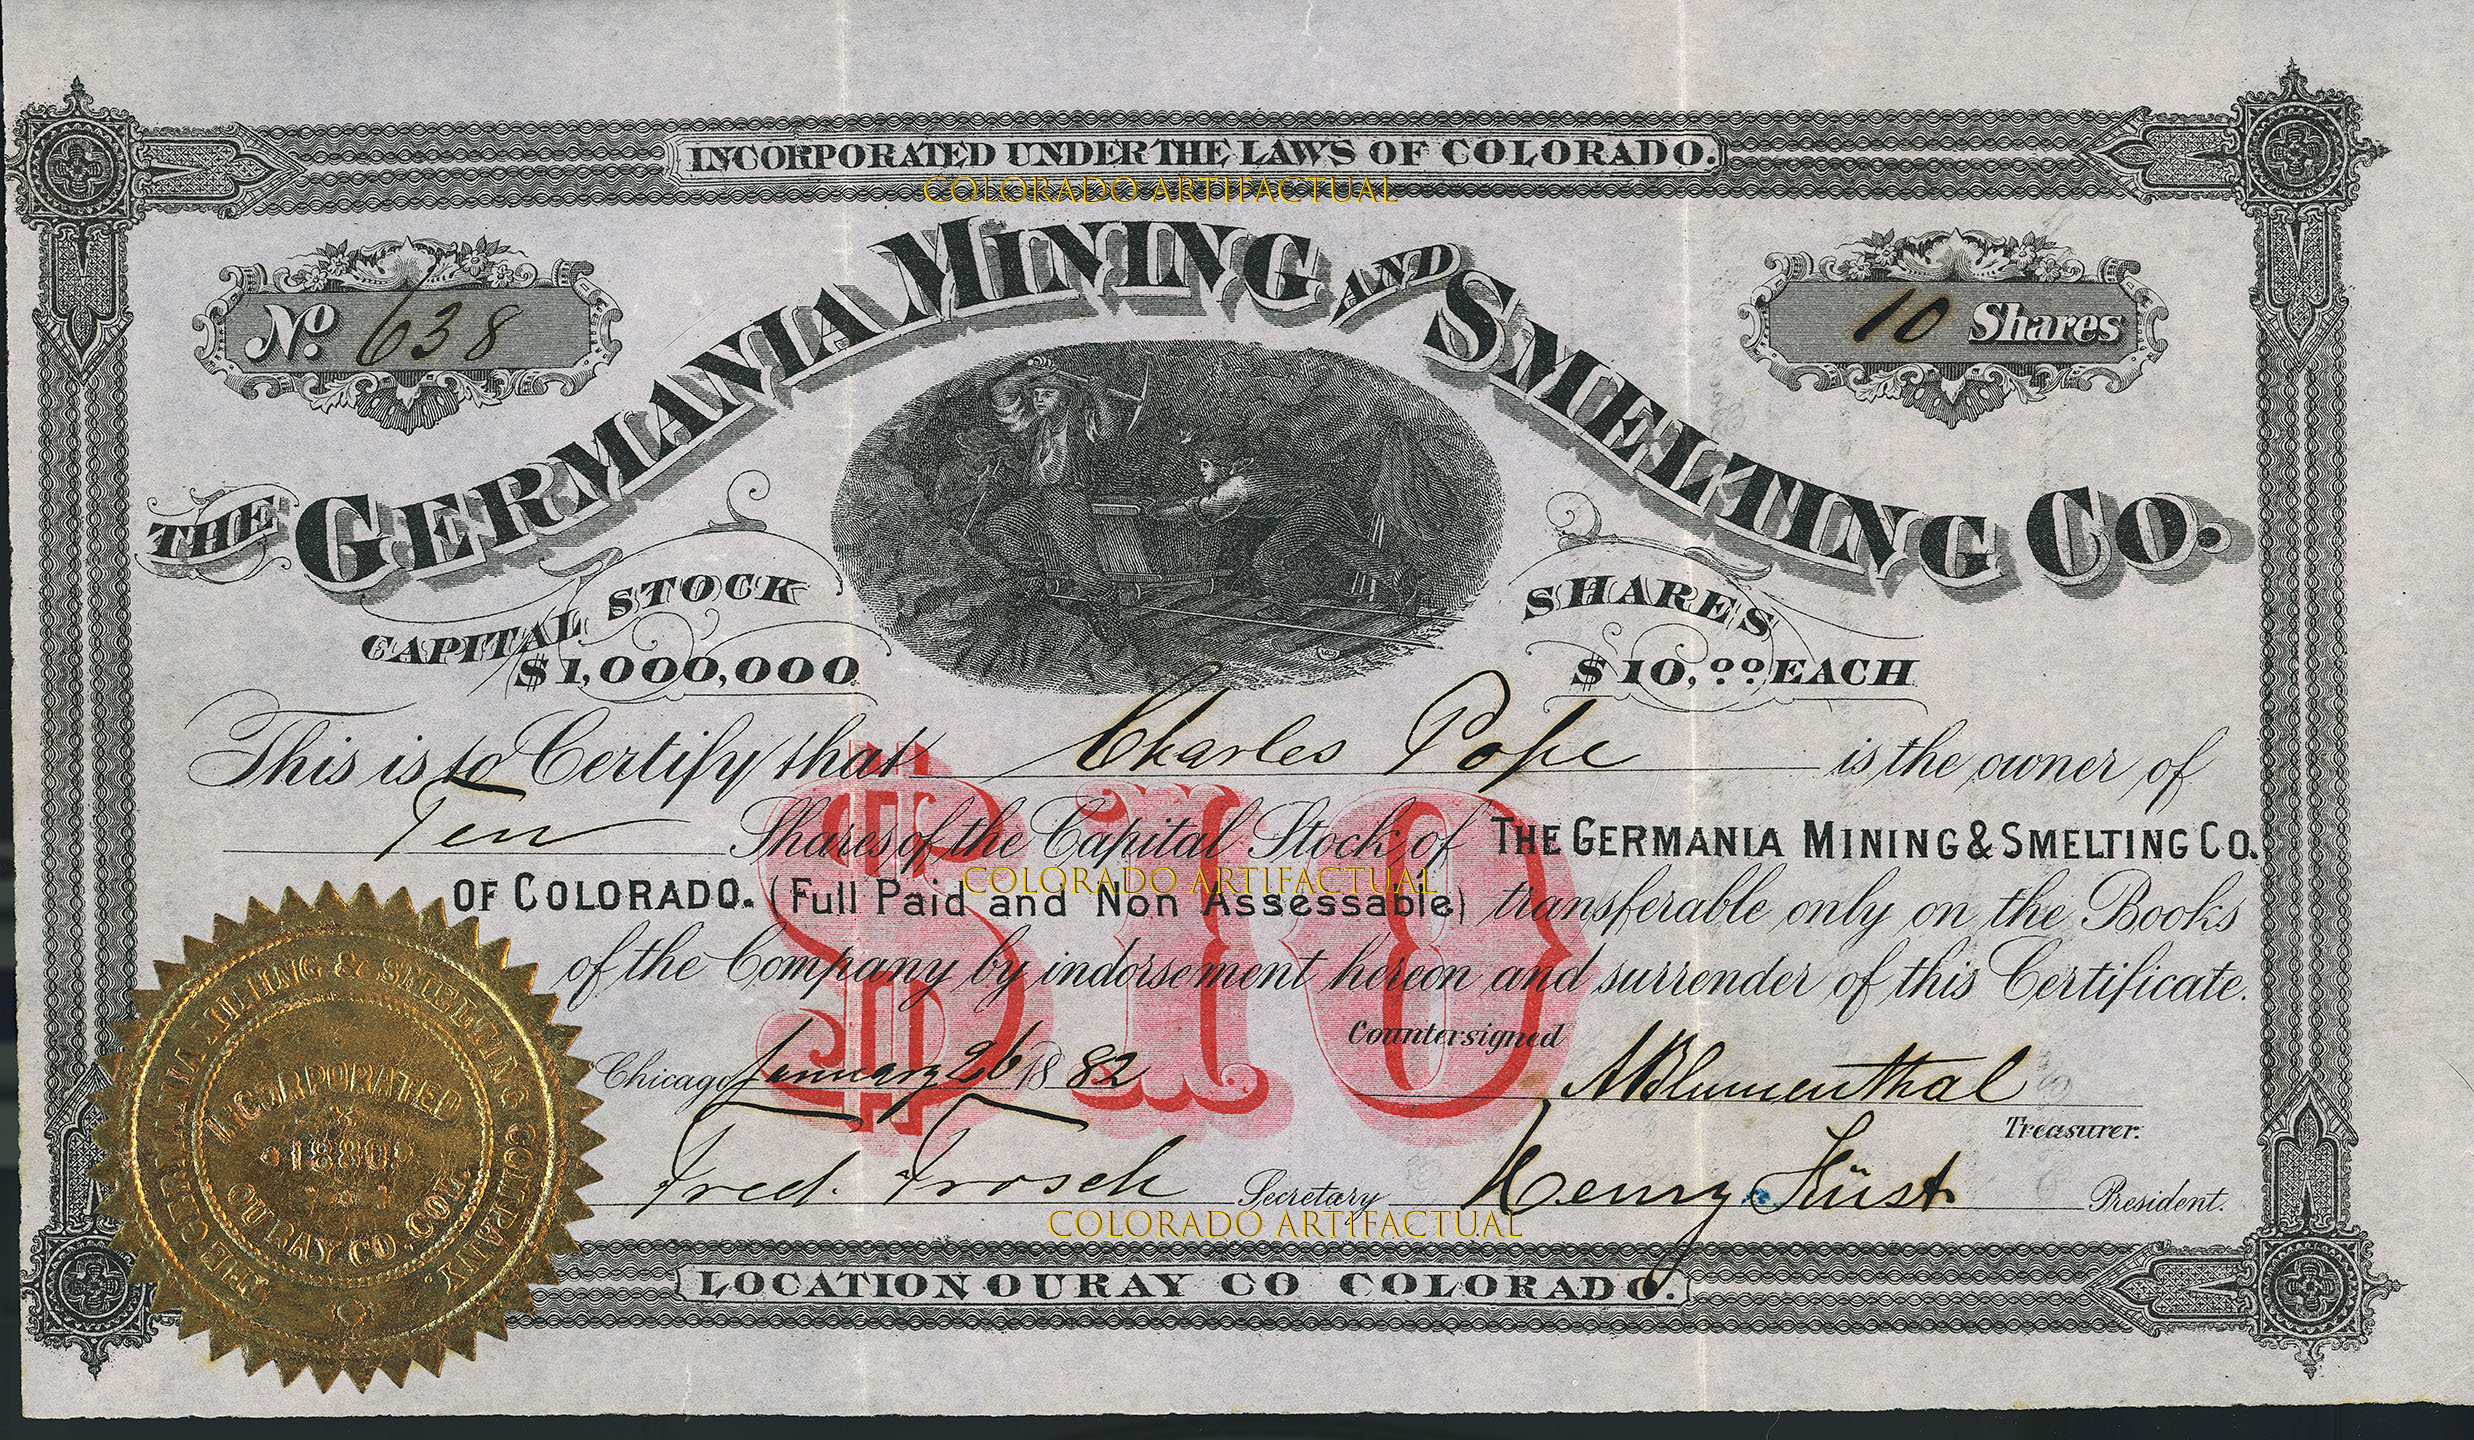 THE GERMANIA MINING & SMELTING COMPANY, Uncompahgre Mining District, Ouray, County, COLORADO, Stock Certificate #638, issued 1882